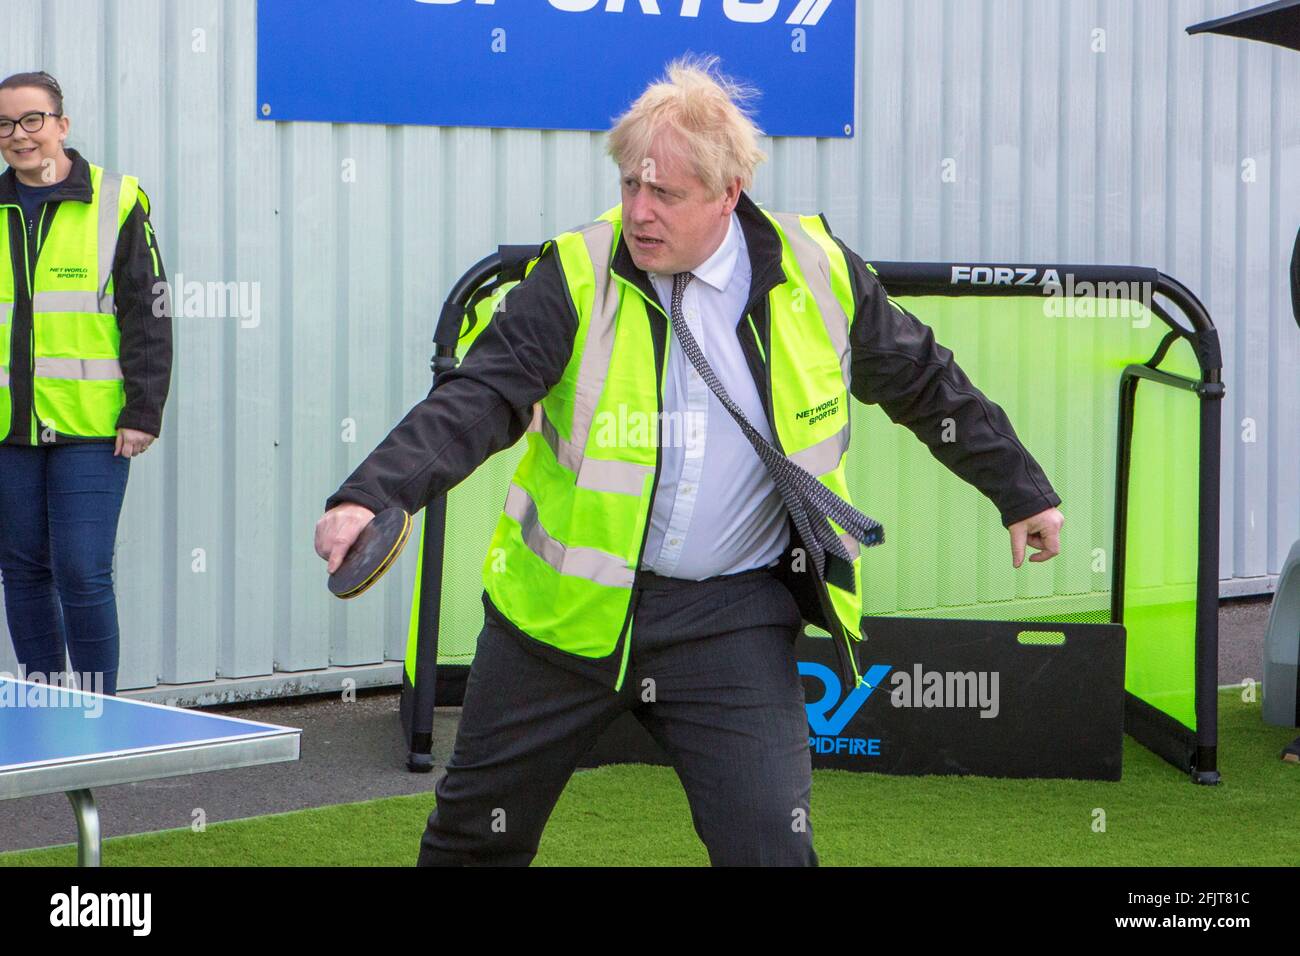 Britain's Prime Minister Boris Johnson plays table tennis during his visit  at Net World Sports in Wrexham, Wales, Britain April 26, 2021. Rob  Formstone/Pool via REUTERS Stock Photo - Alamy